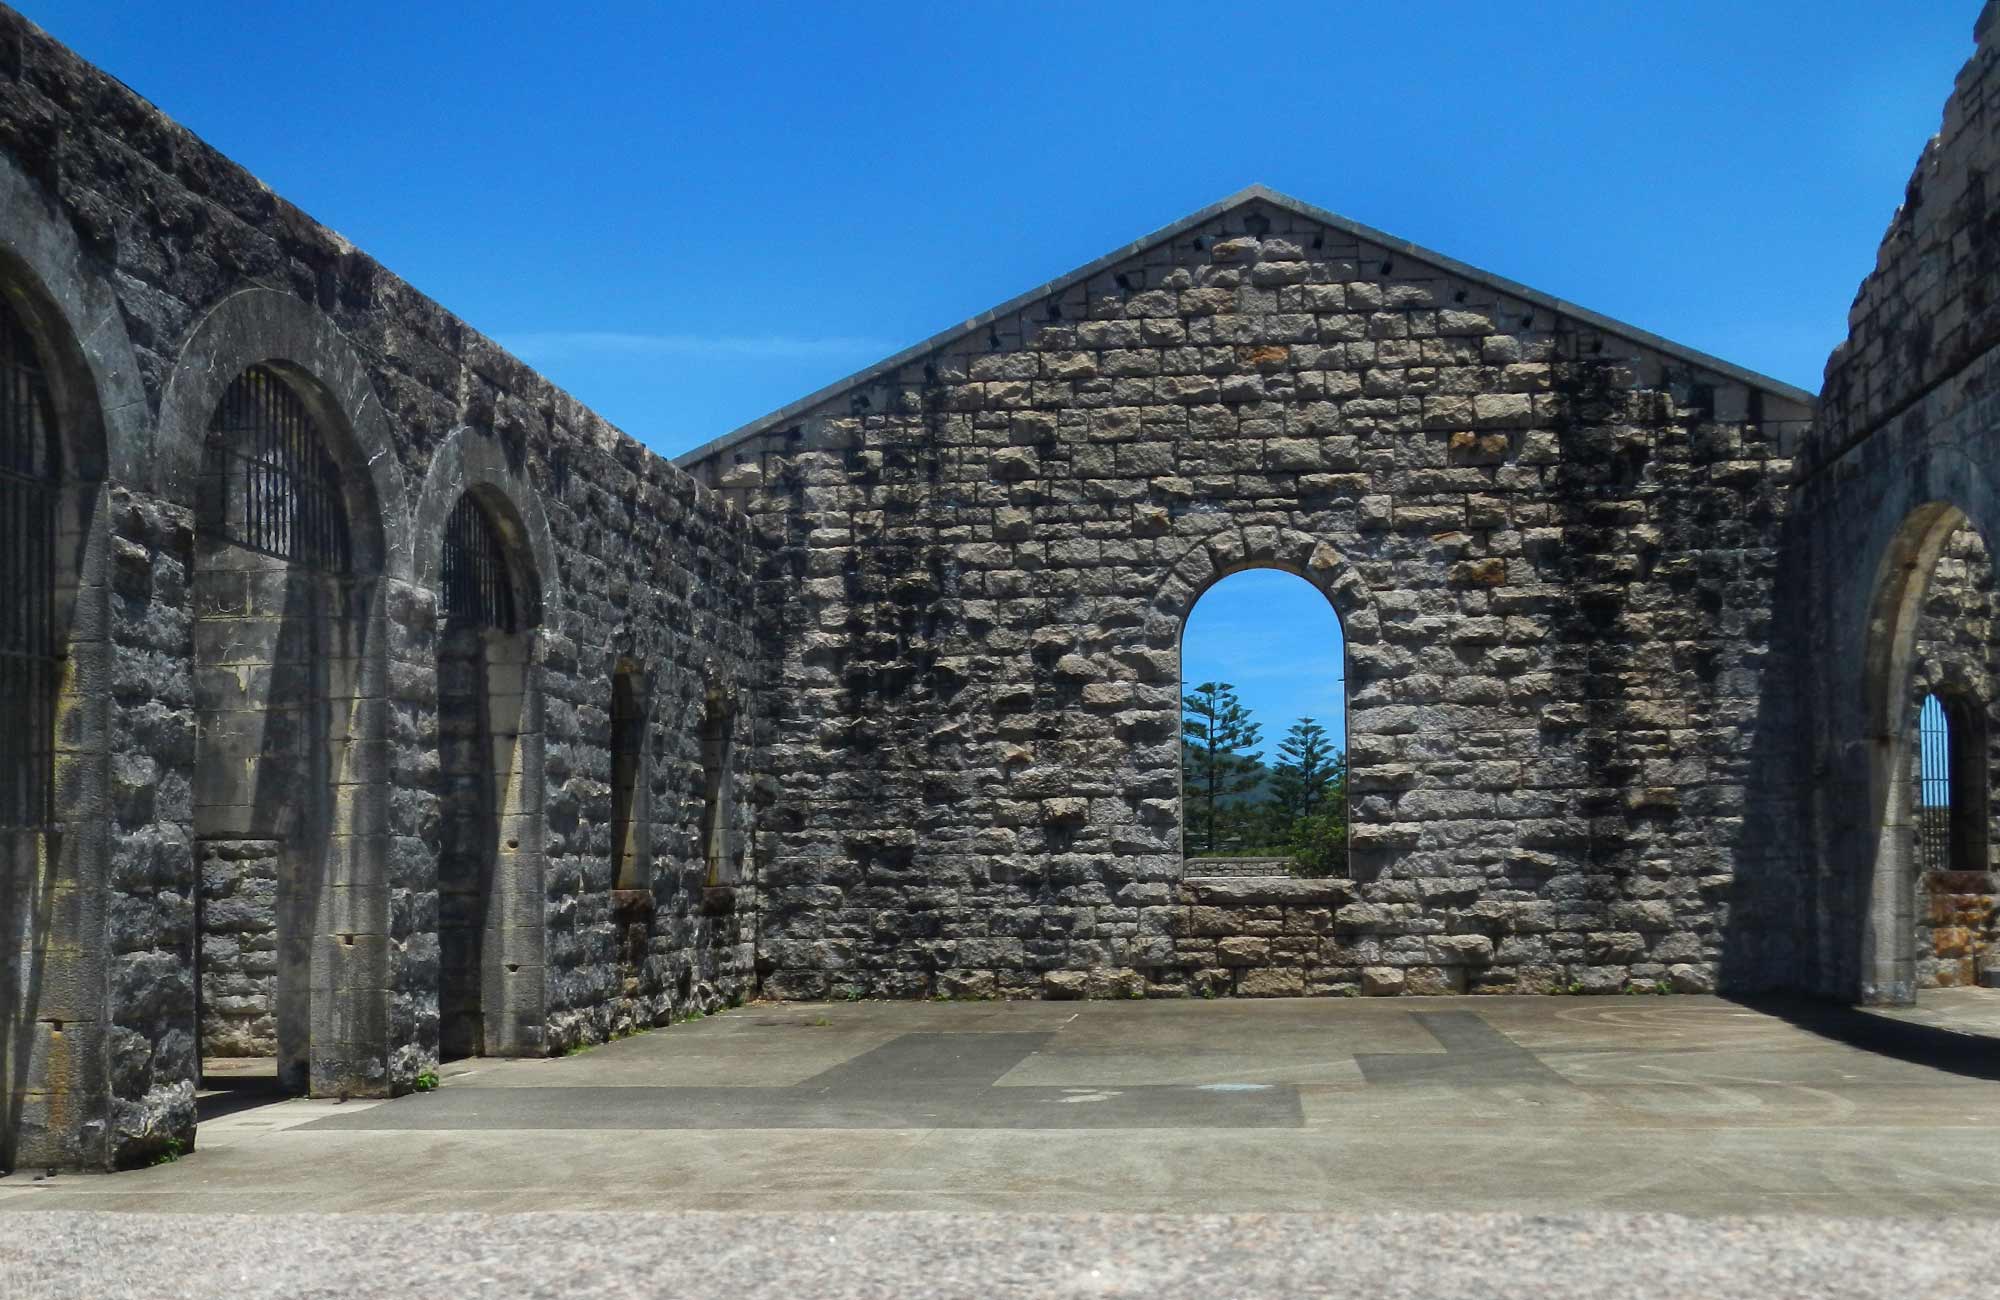 Looking thought the stone arches, Trial Bay Gaol. Photo: Debby McGerty